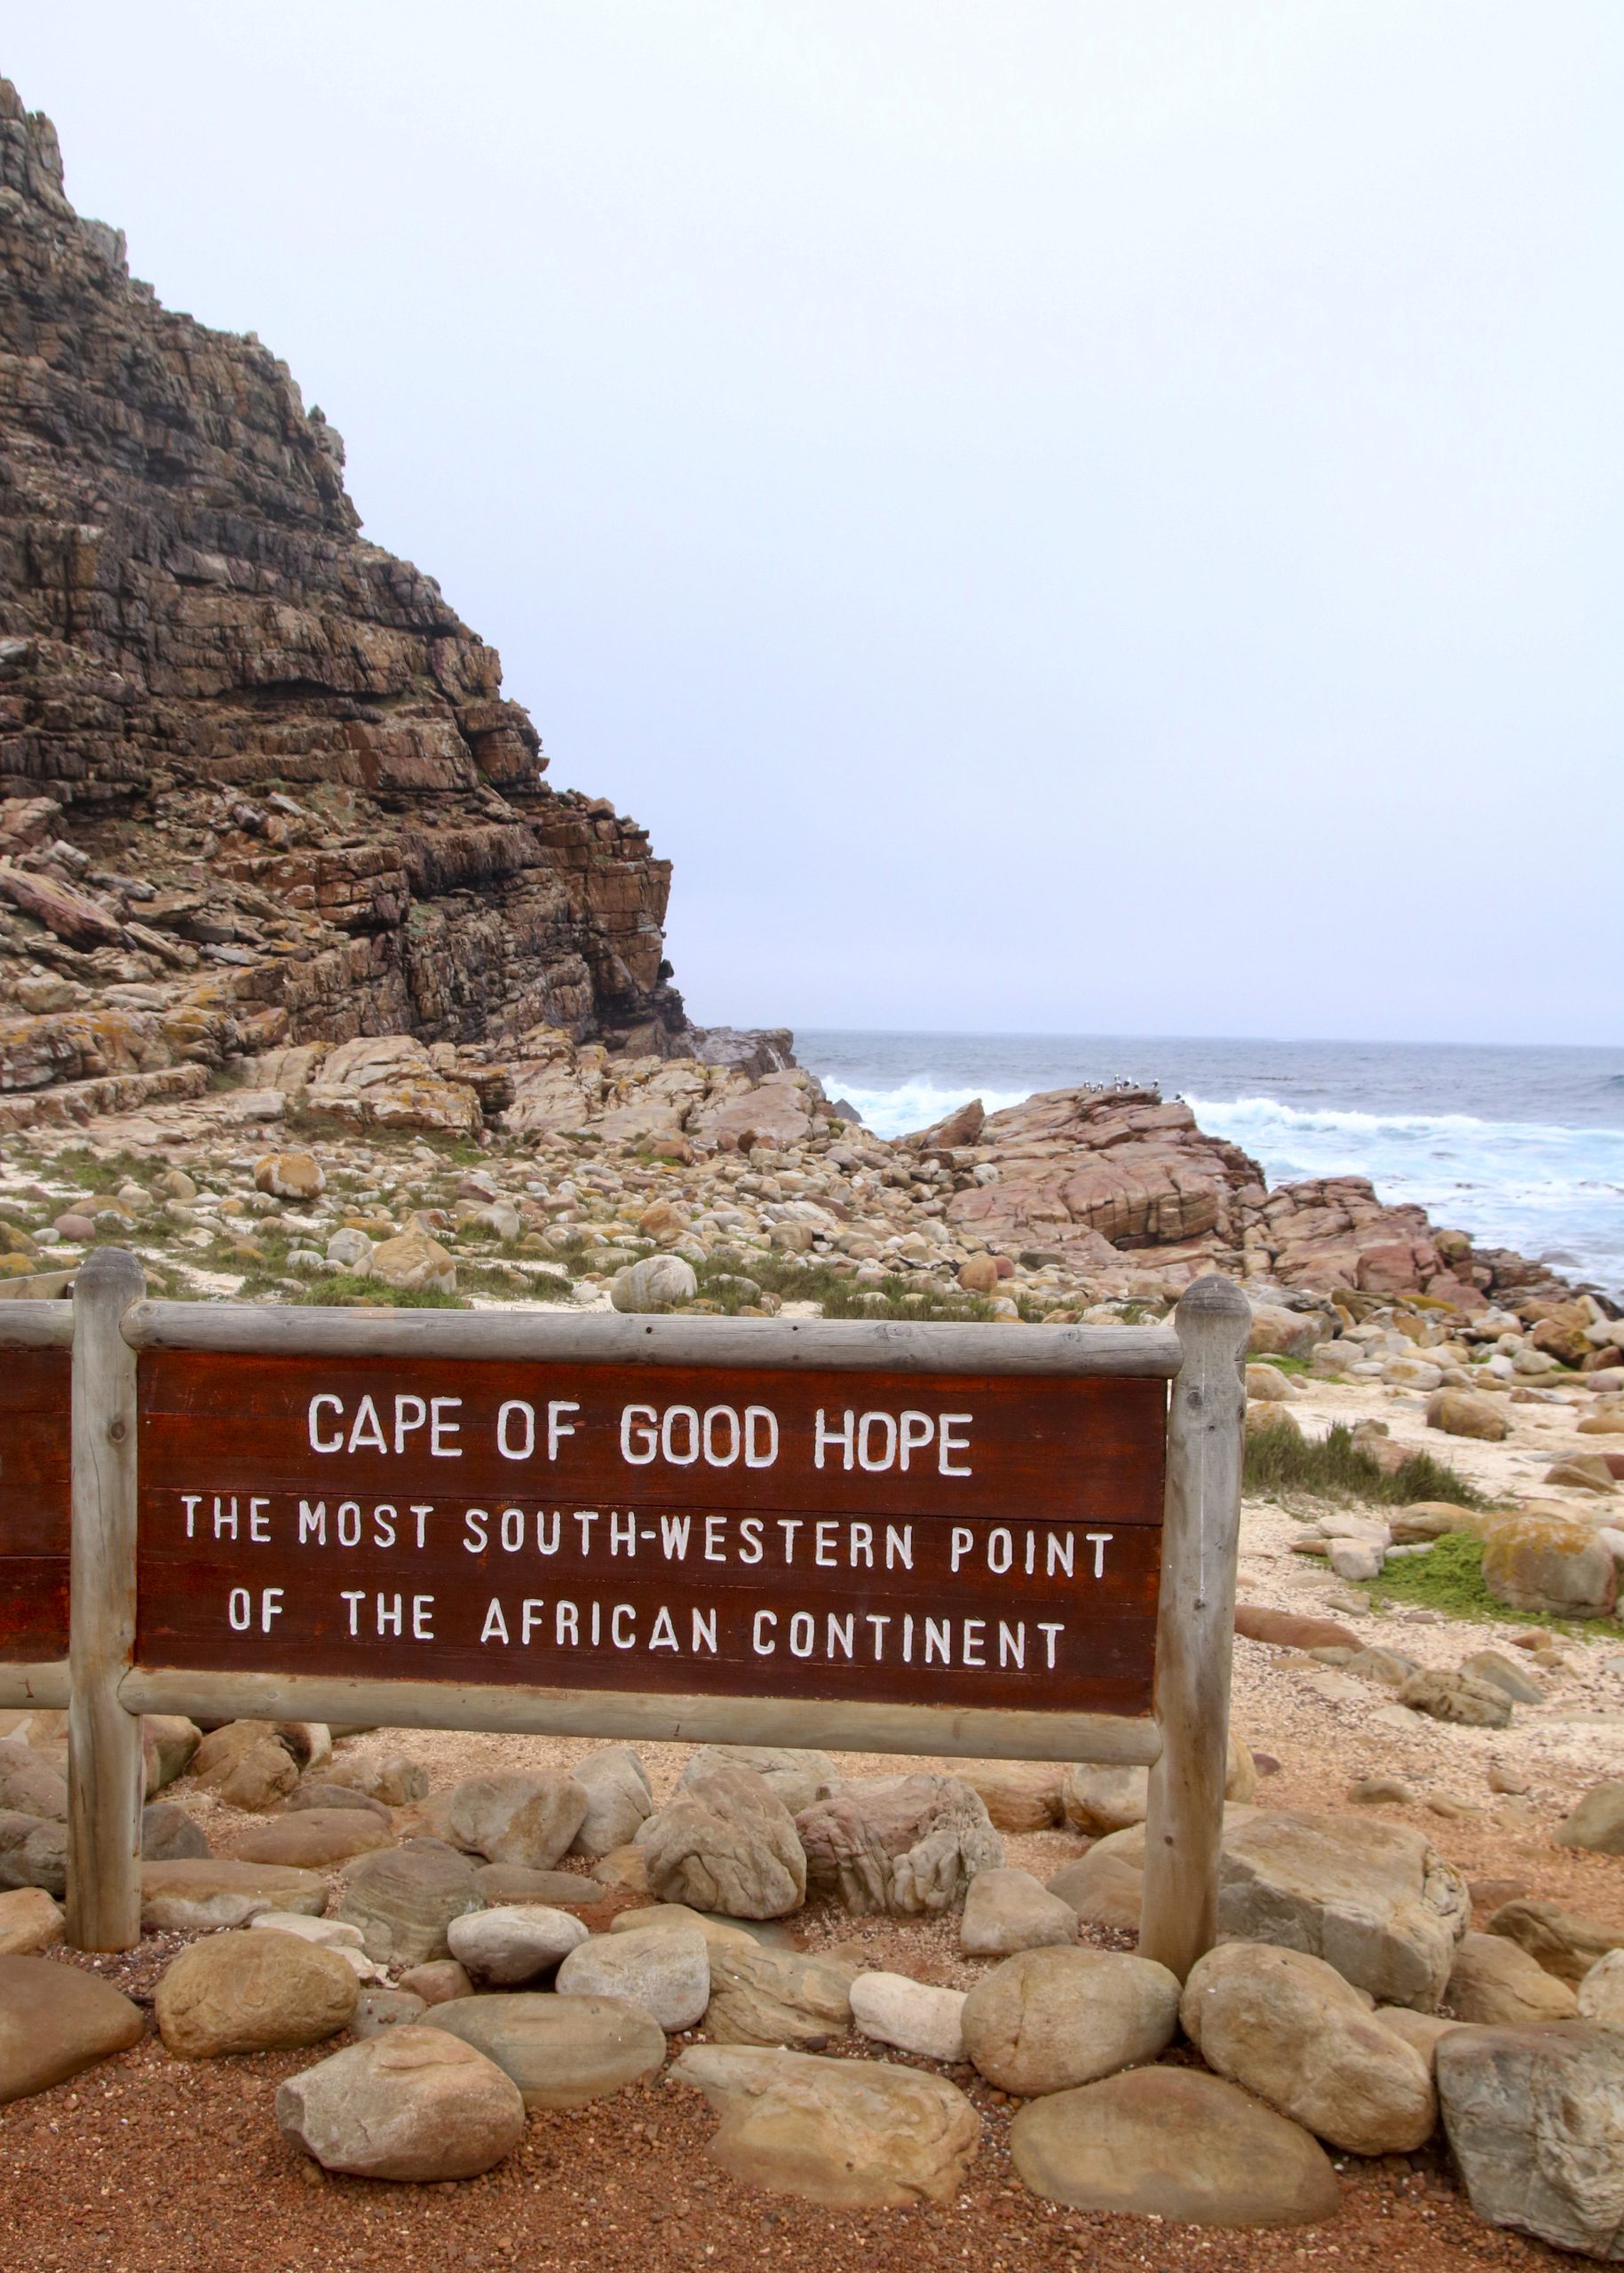 rocky coast with signboard "Cape of Good Hope"